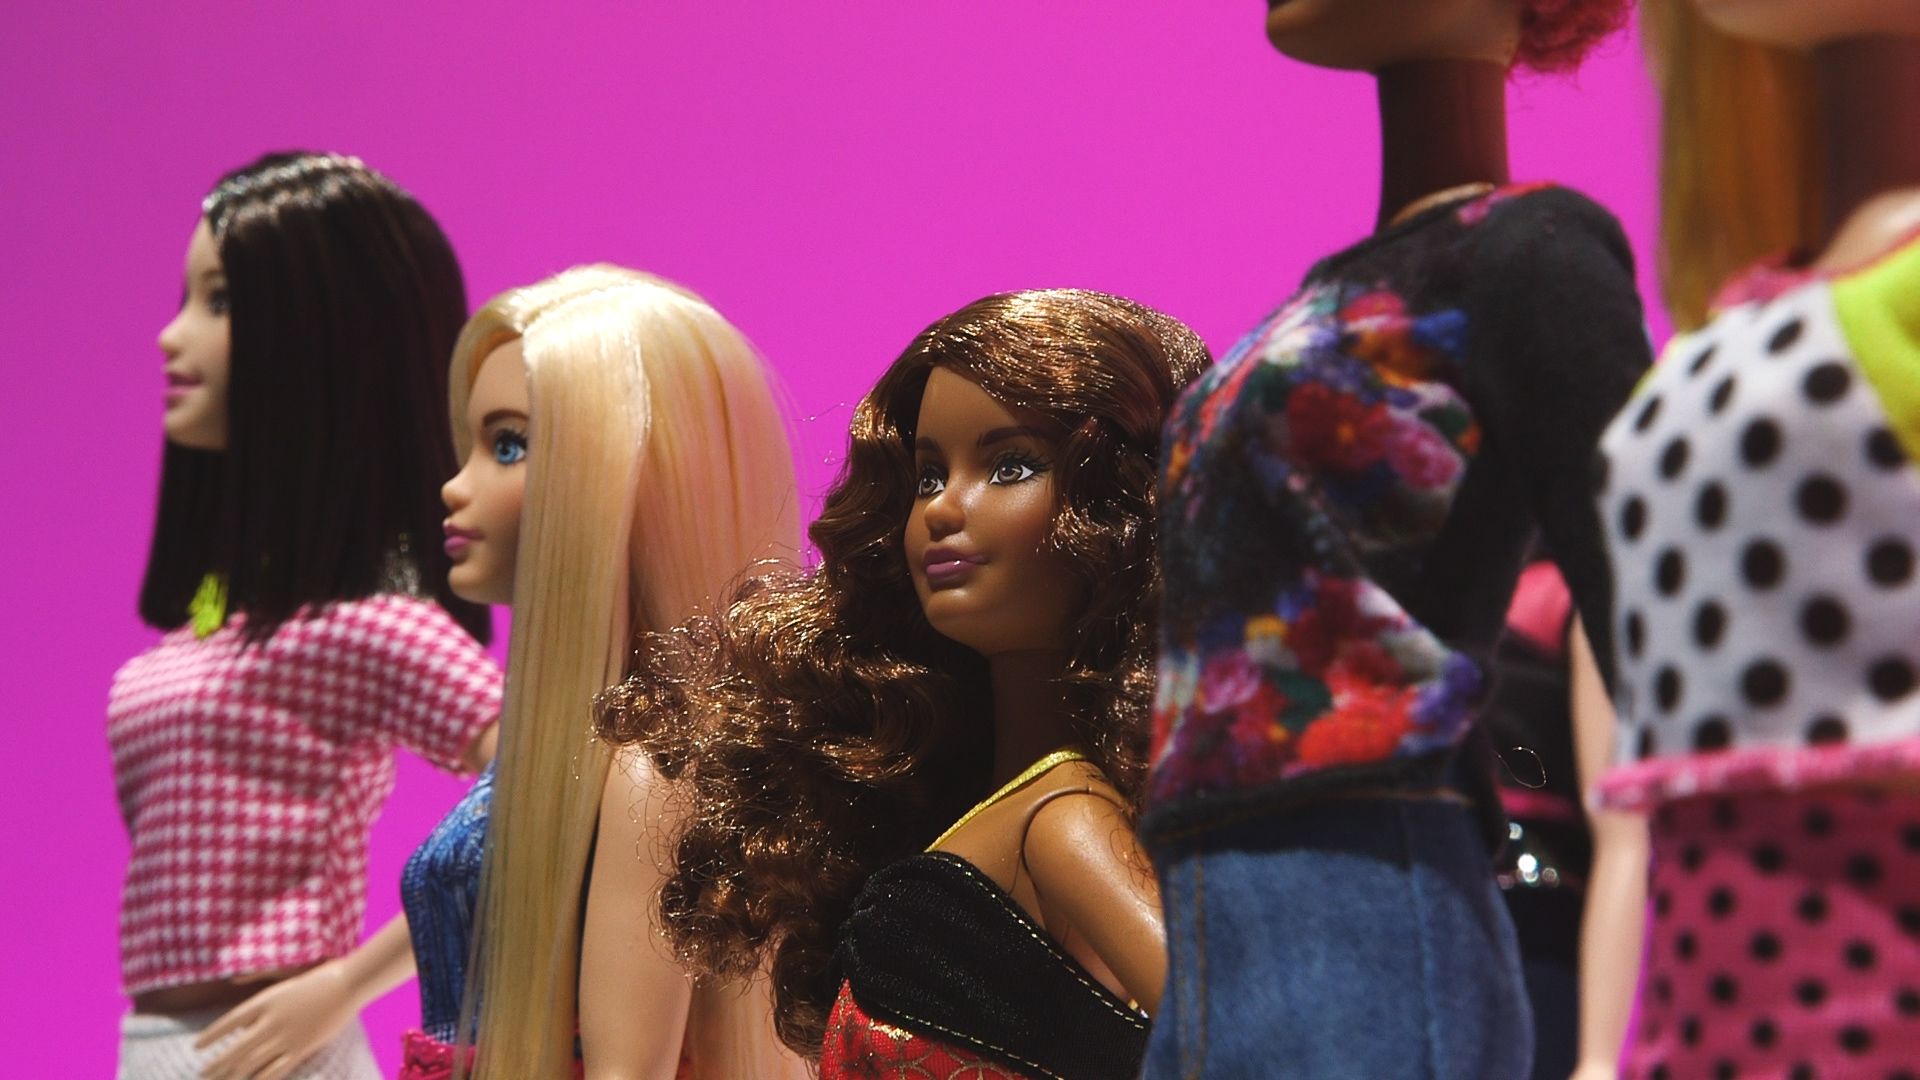 Mattel's New Black Barbie Has Controversial Hair - Racked